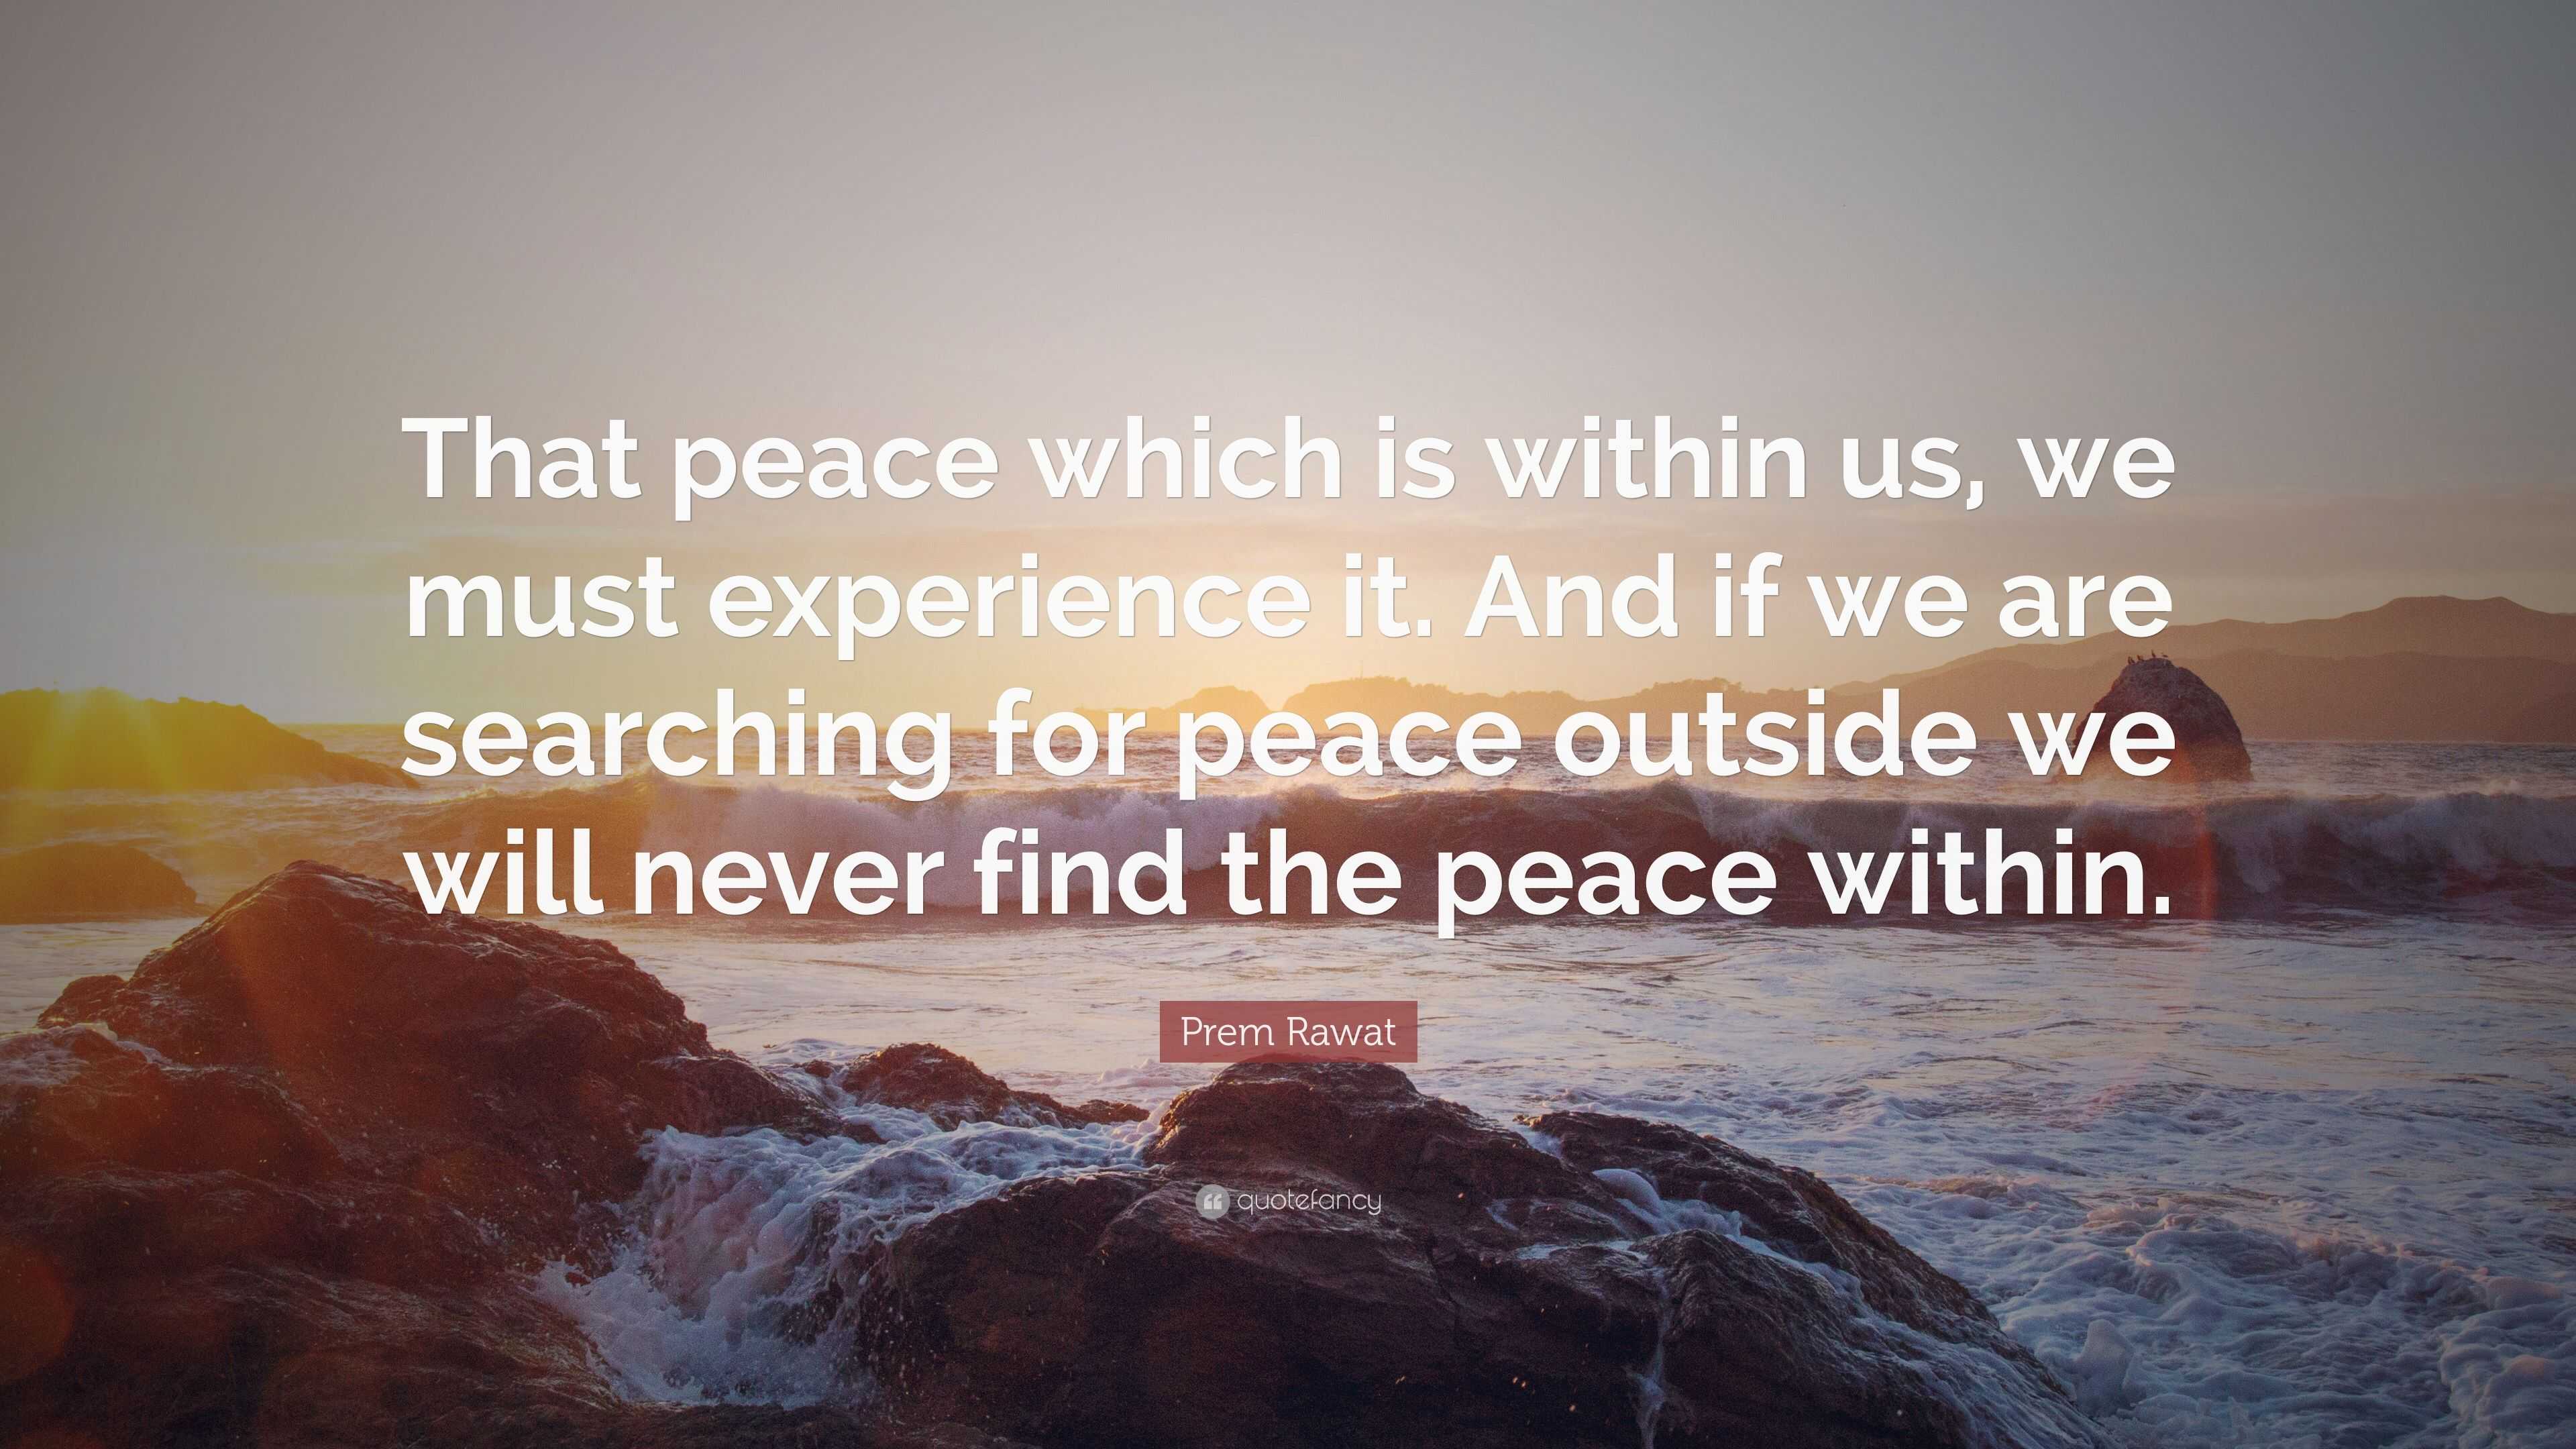 Prem Rawat Quote: “That peace which is within us, we must experience it ...